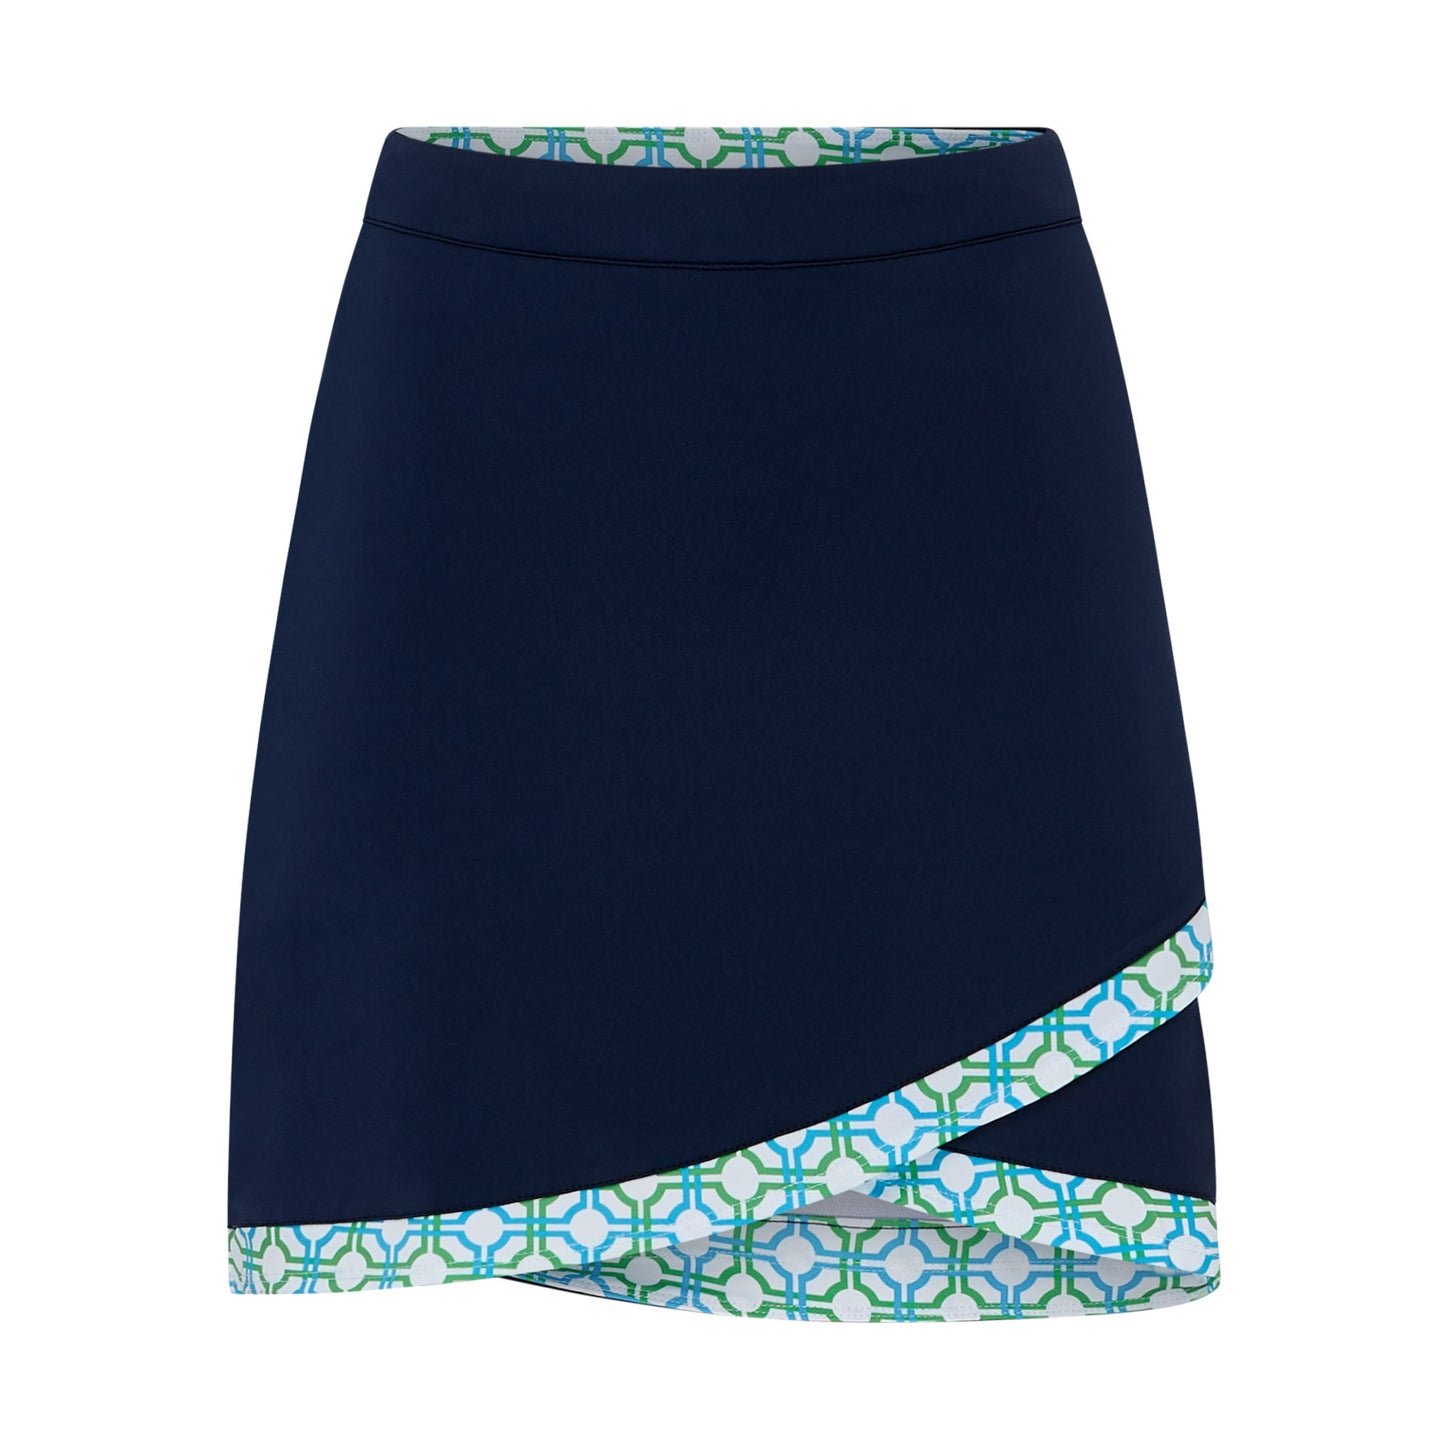 Swing Out Sister Women's Navy Pull-On Scalloped Skort with Dazzling Blue and Emerald Trim